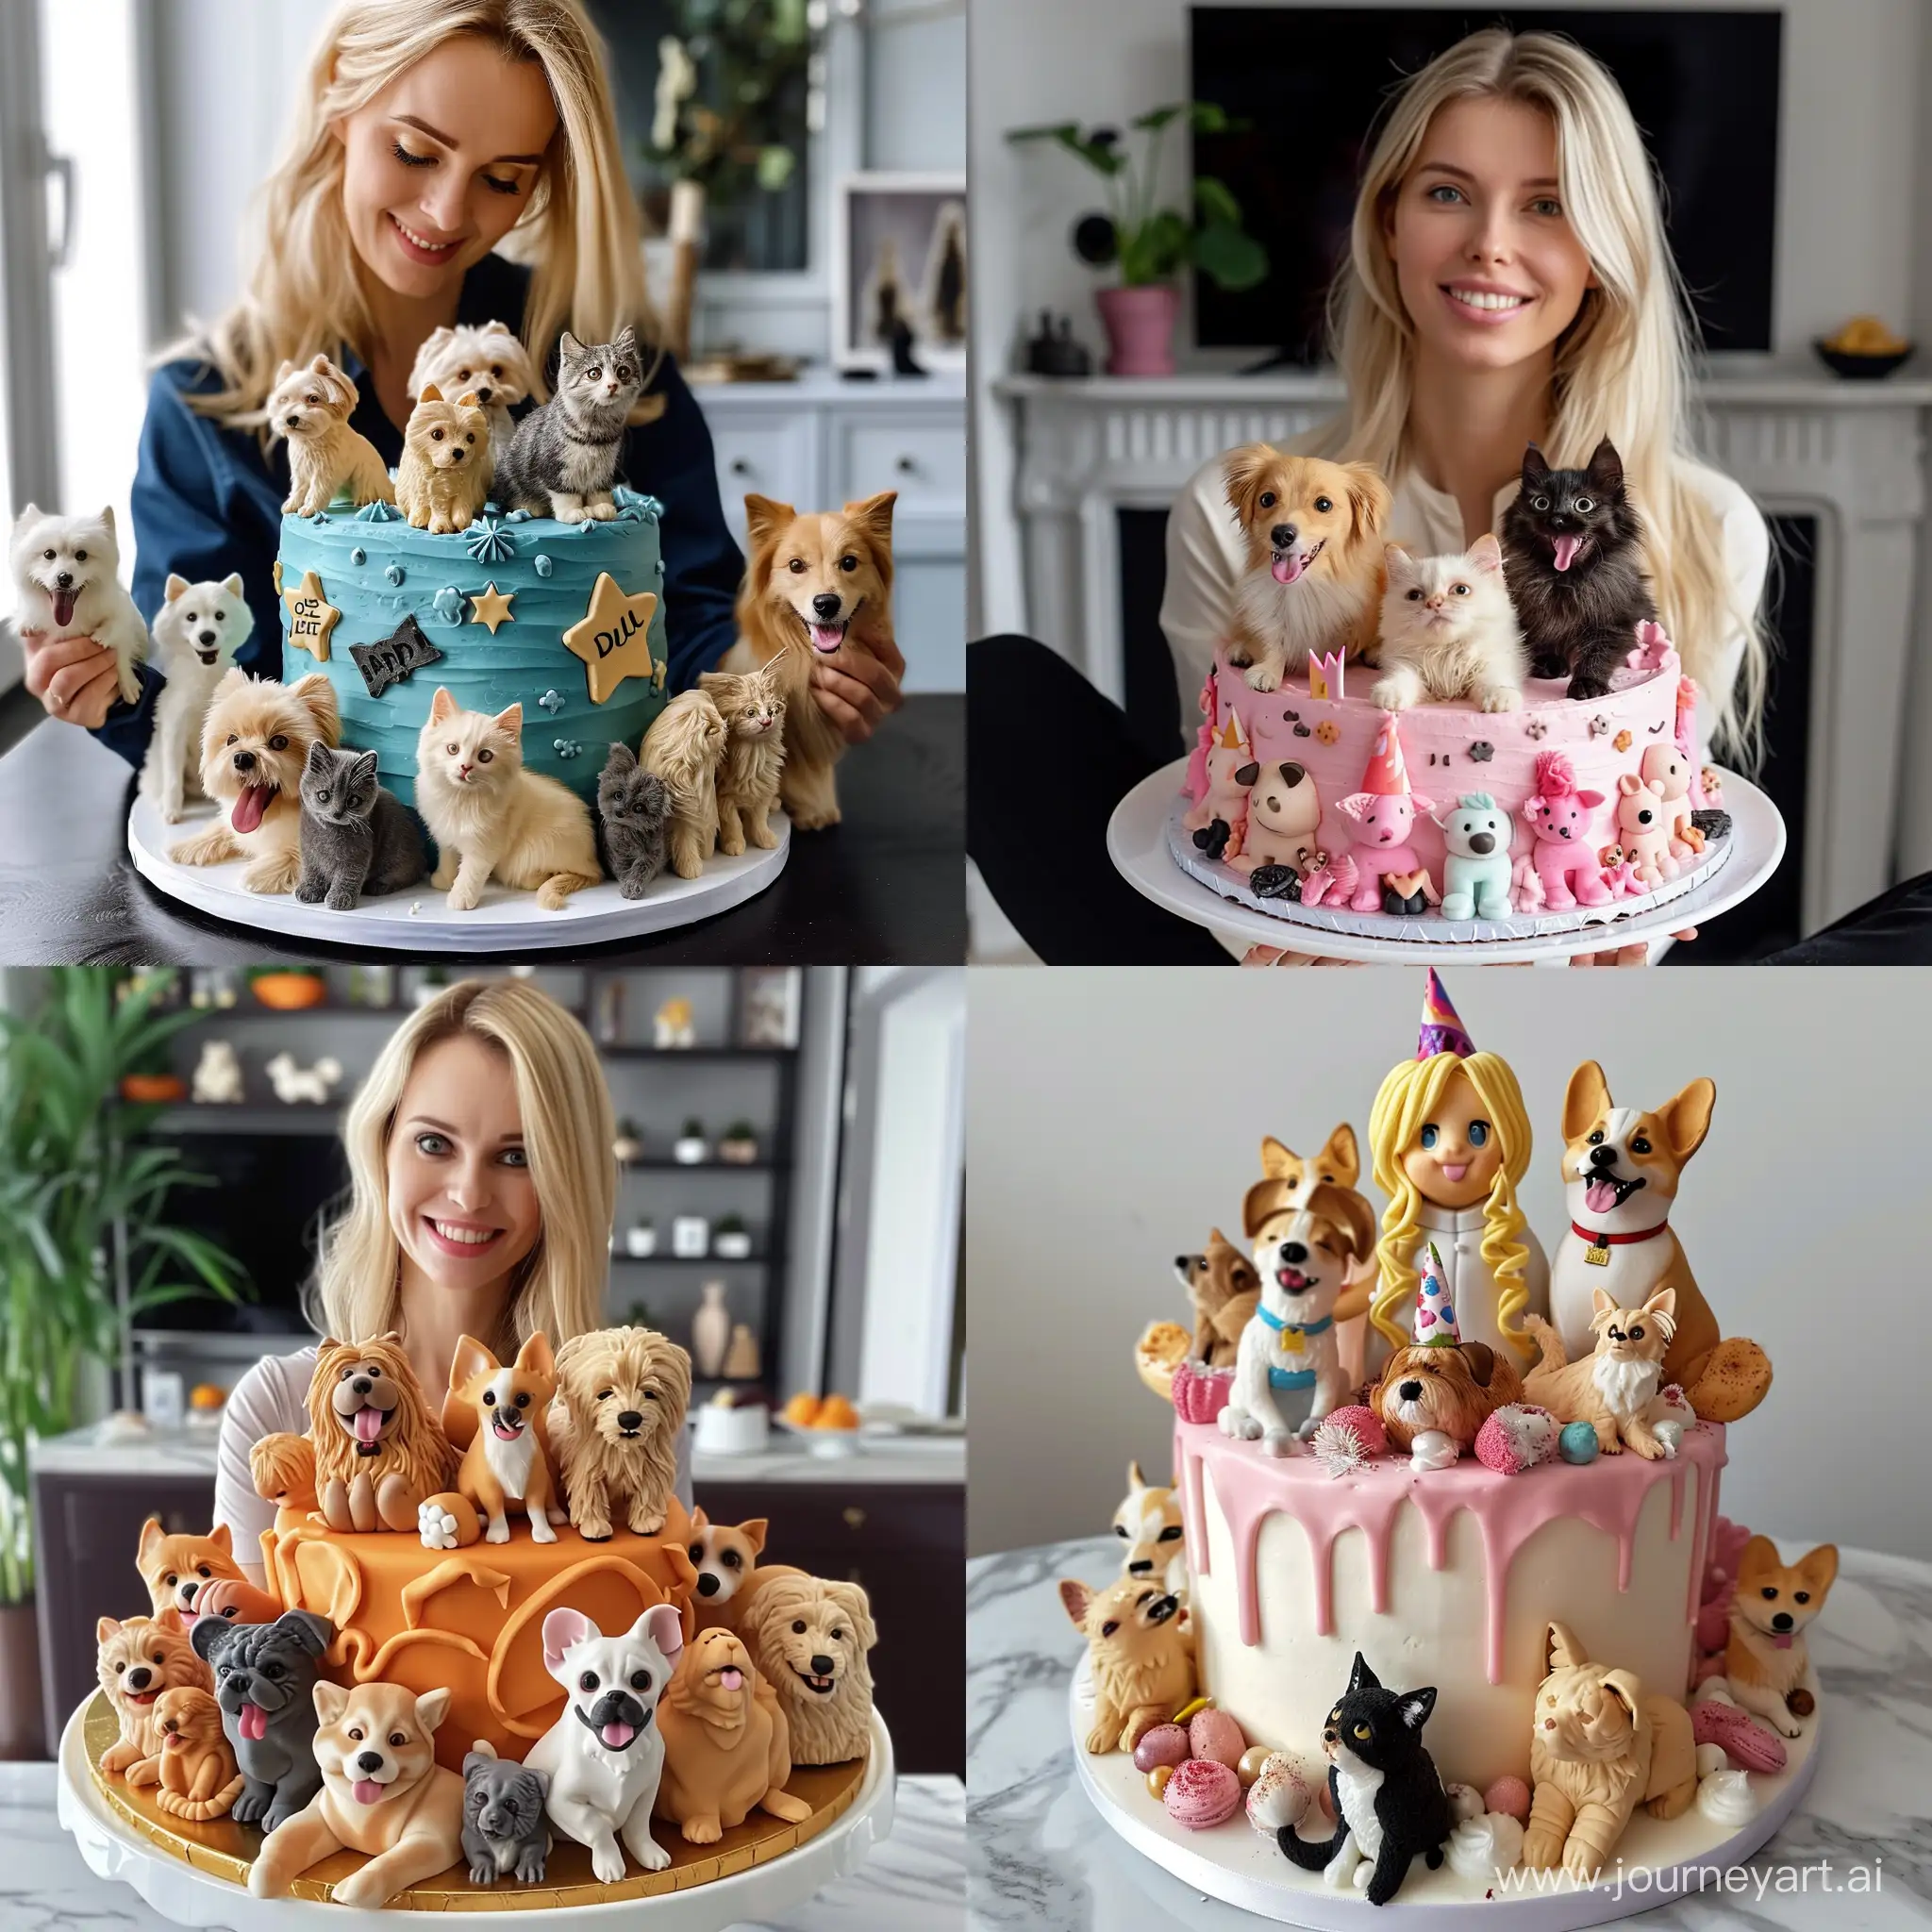 happy birthday cake for sorina pharmacyst blonde who loves dogs and cats